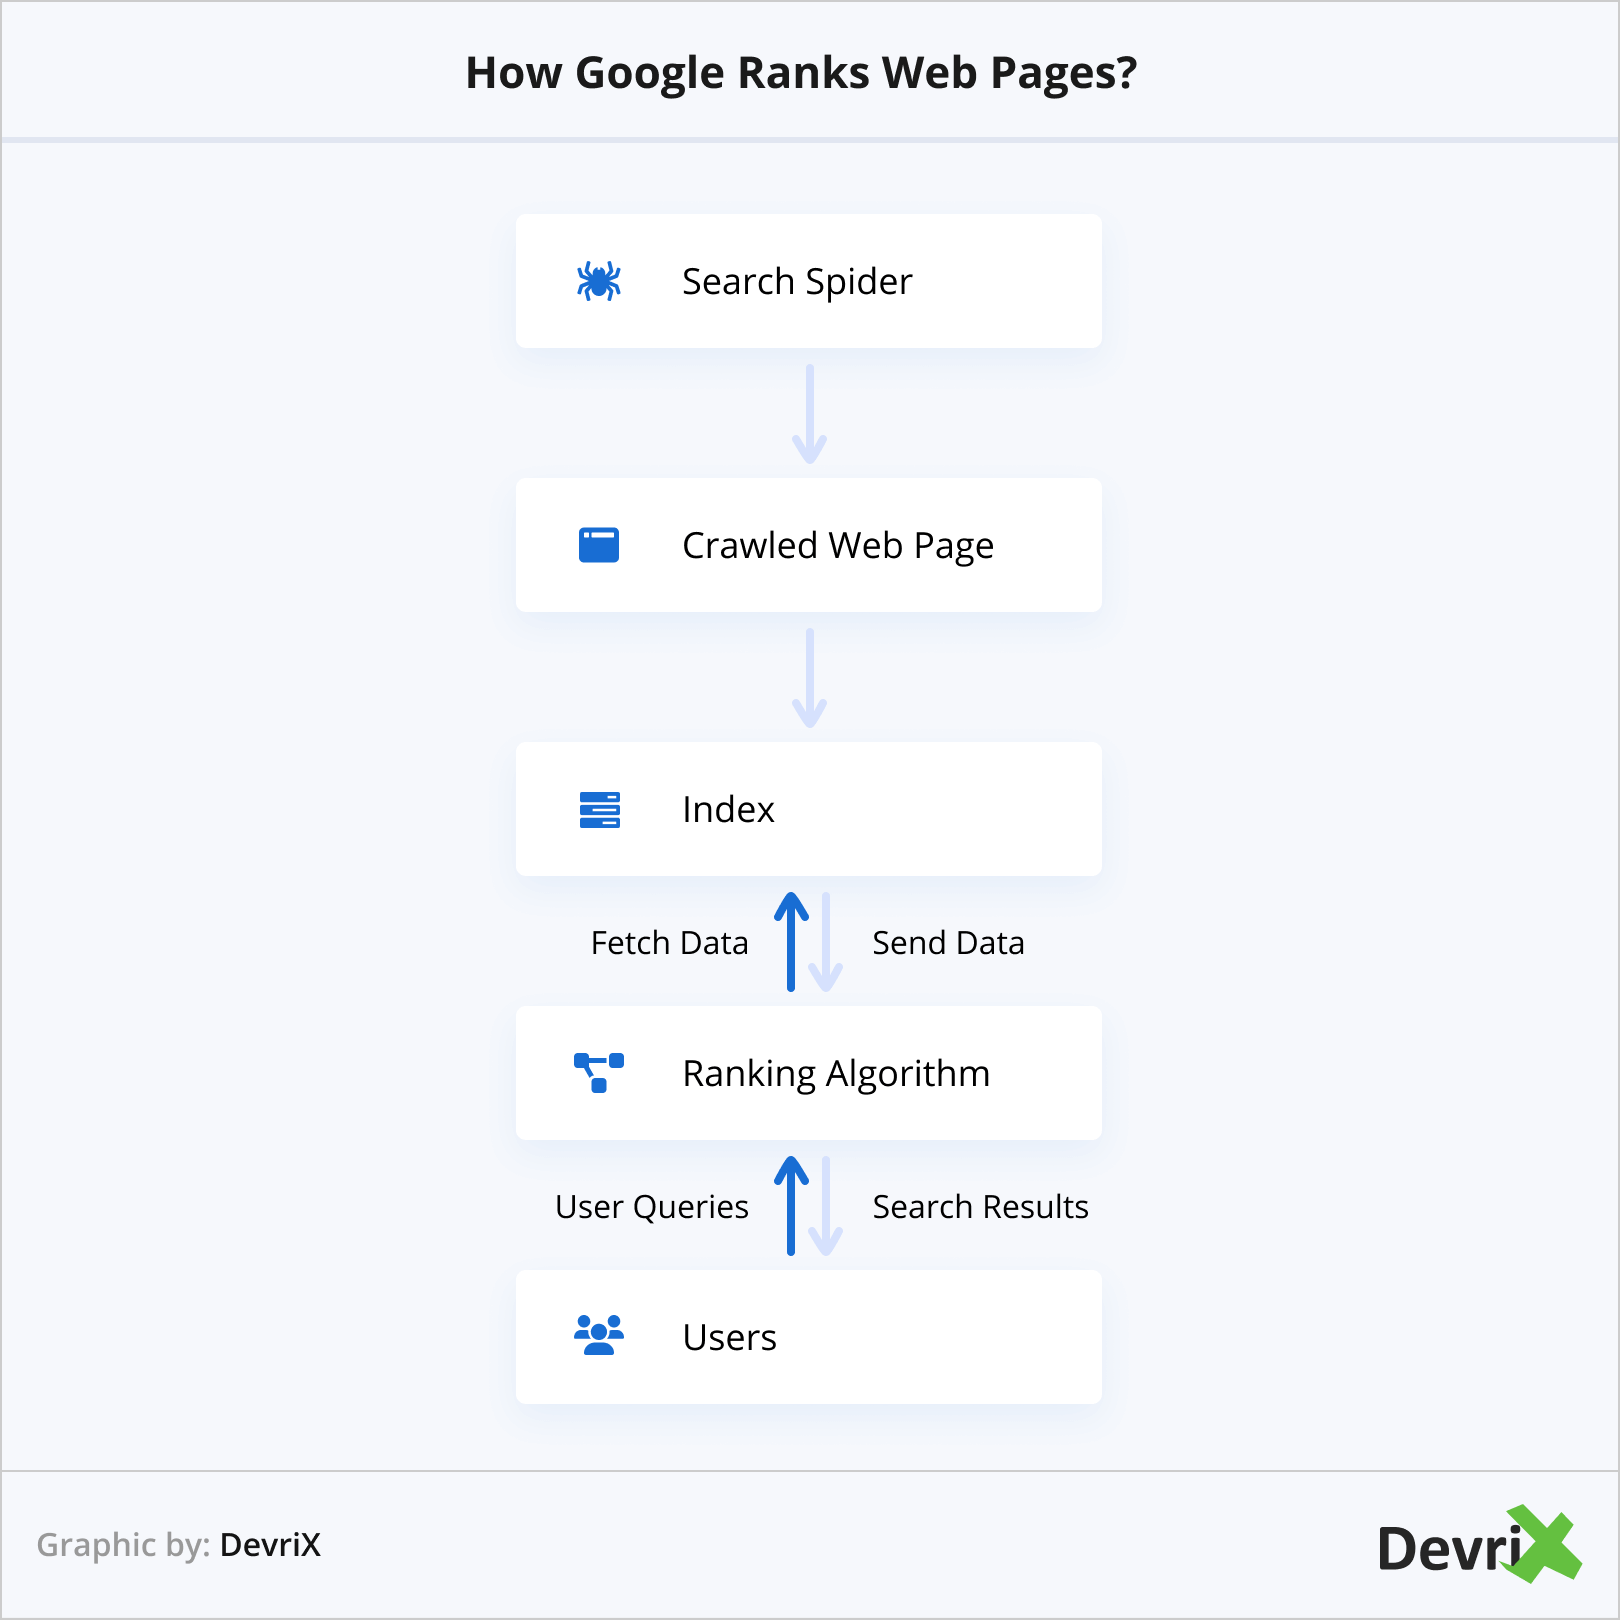 How Google Ranks Web Pages